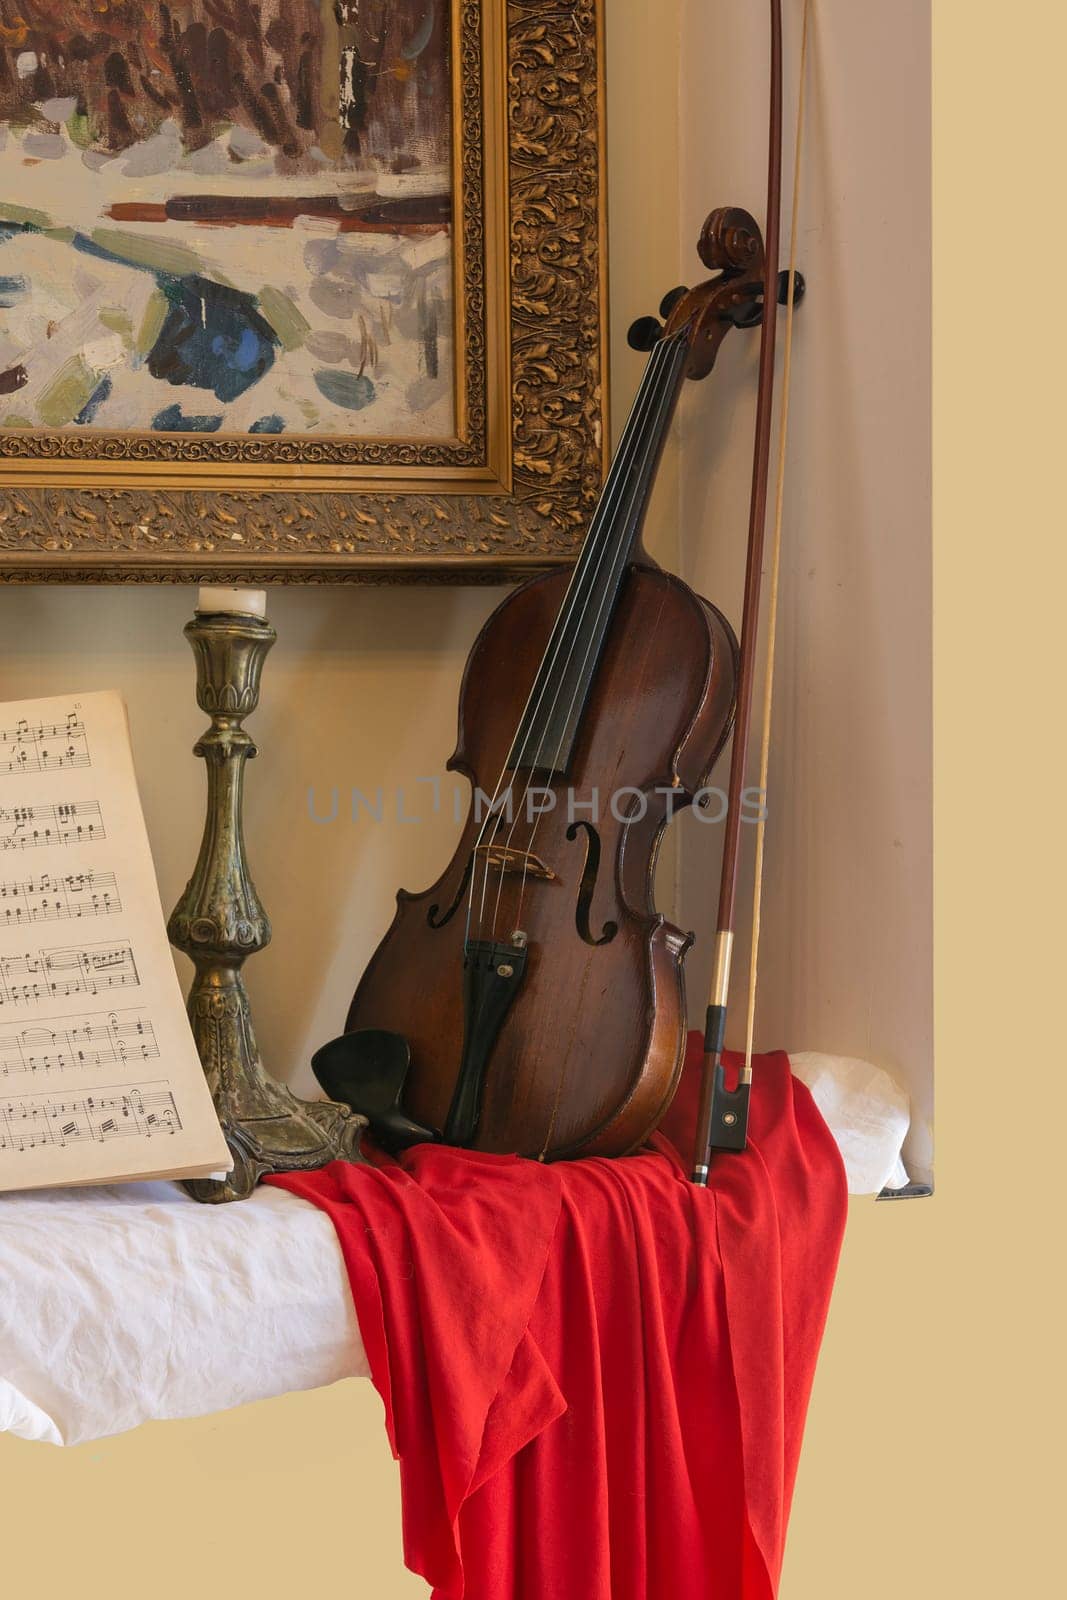 Still life with a violin in the corner by ben44